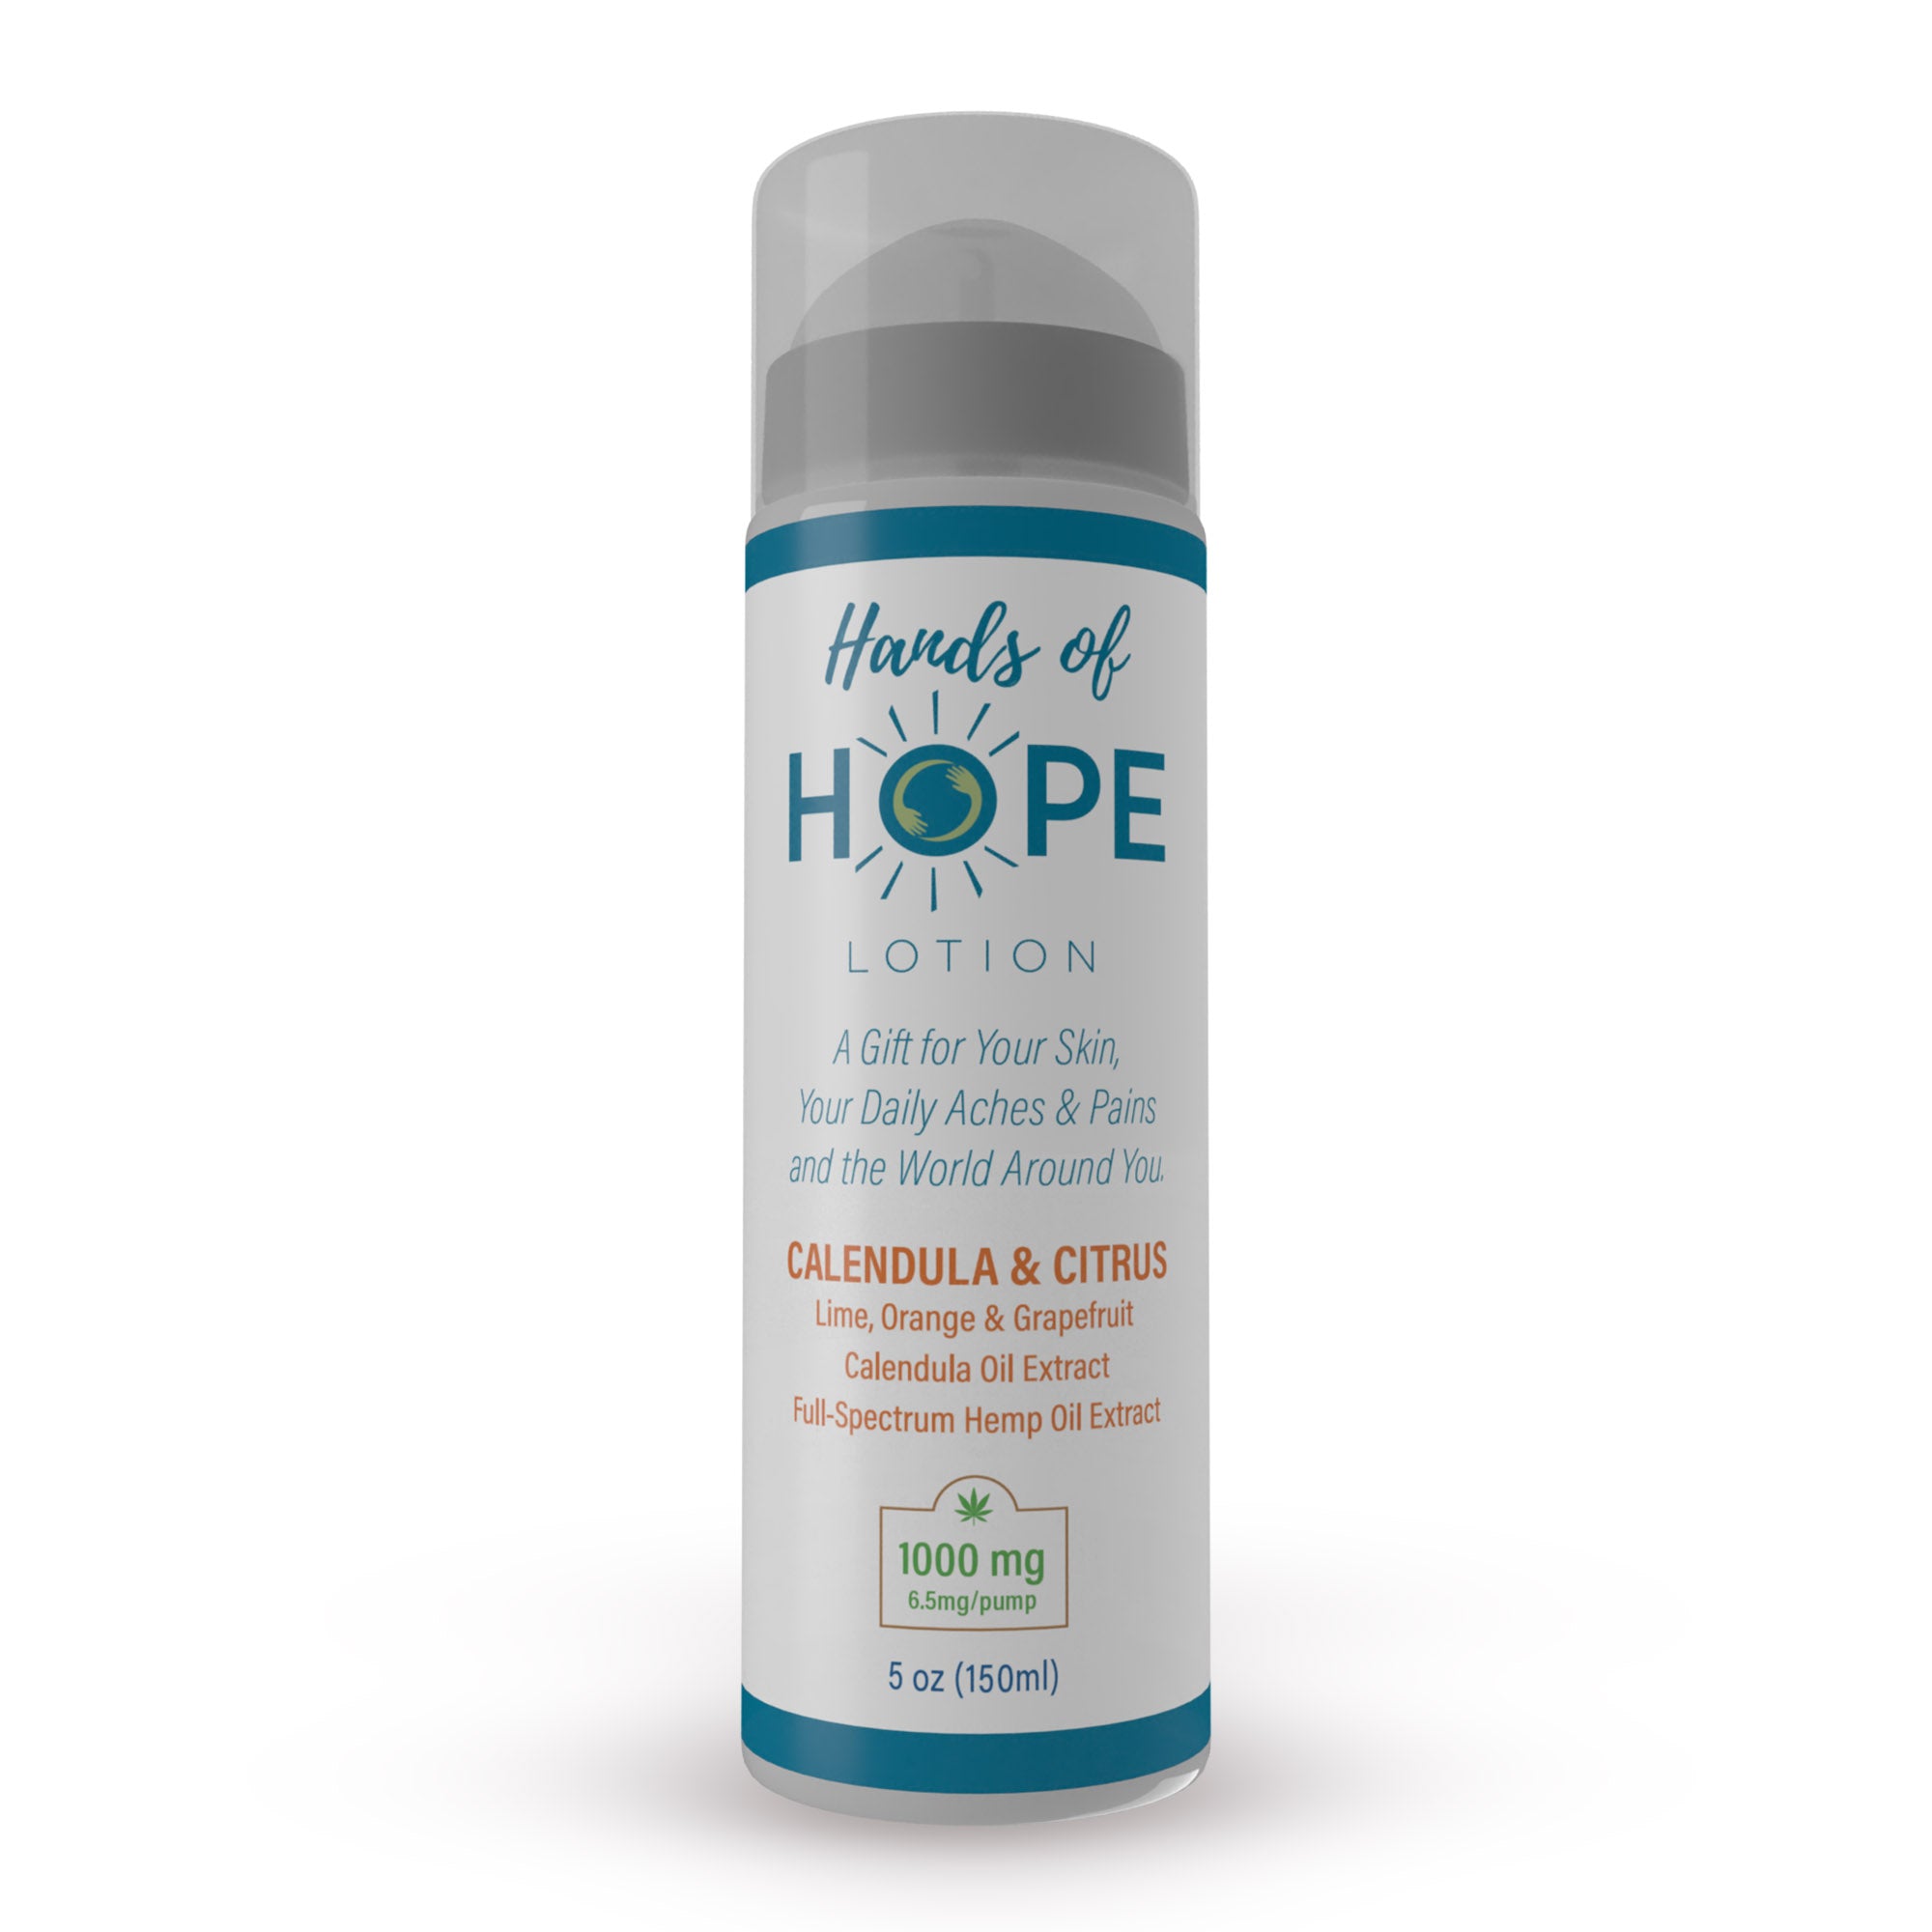 Hands of Hope Lotion for Gifts the Give Hope (Full size)-When you give a gift, it does something.
Expressing genuine thoughtfulness can change hearts. And changed hearts can change lives.
This incredible lotion is inspired-Cedar Meadow Farm